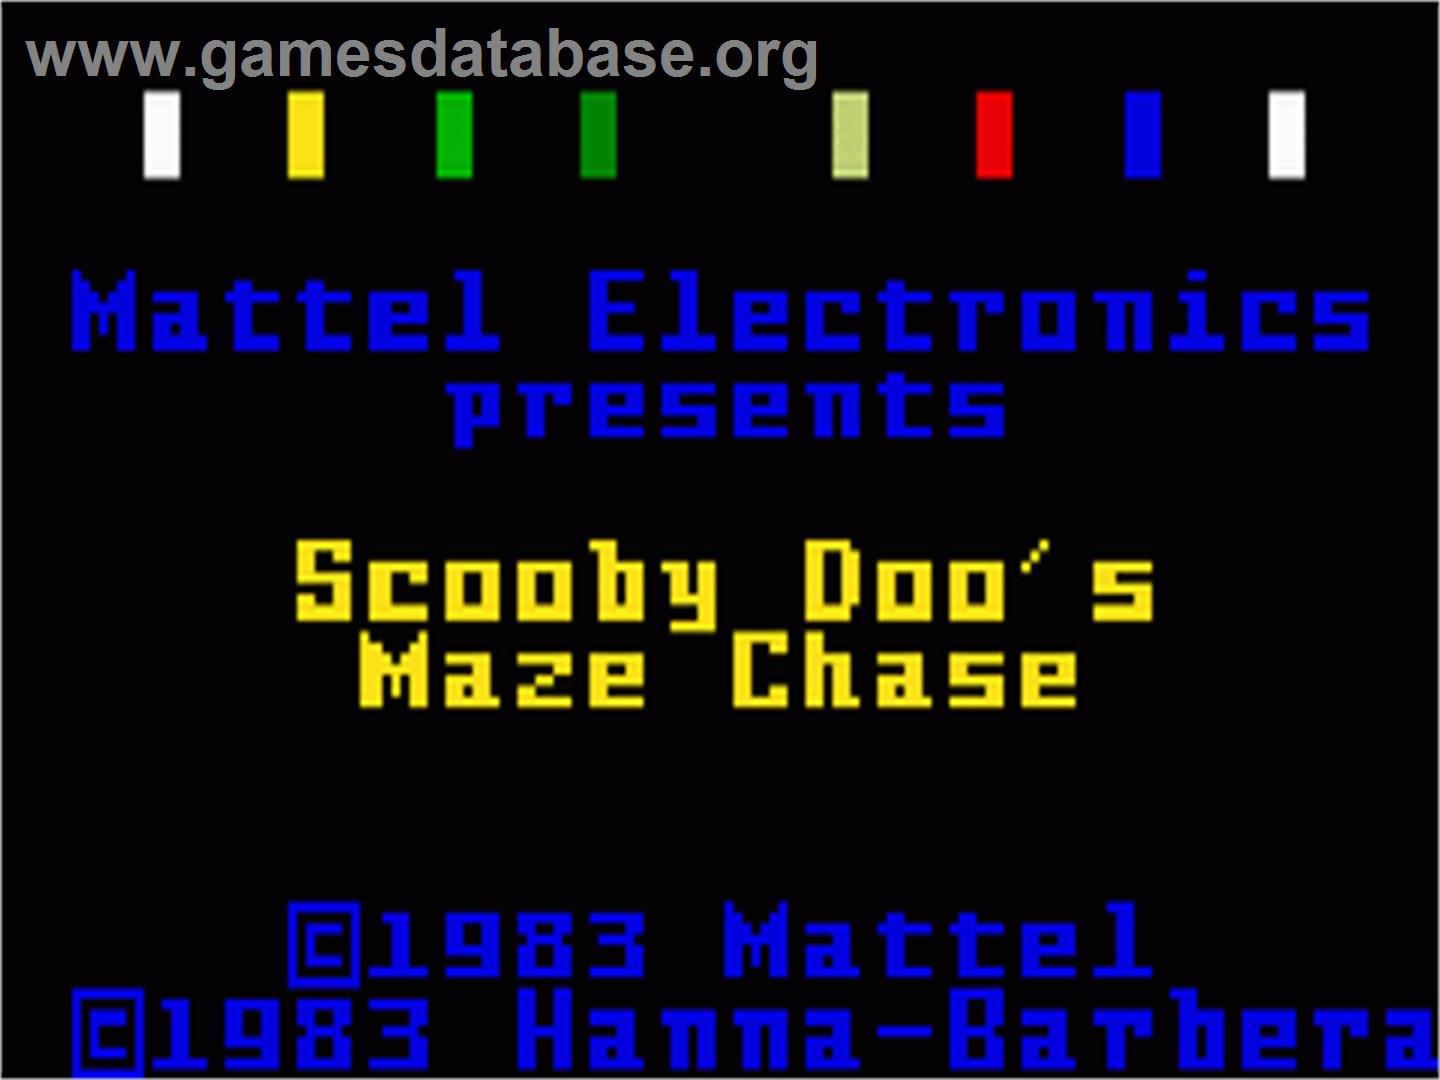 Scooby Doo's Maze Chase - Mattel Intellivision - Artwork - Title Screen